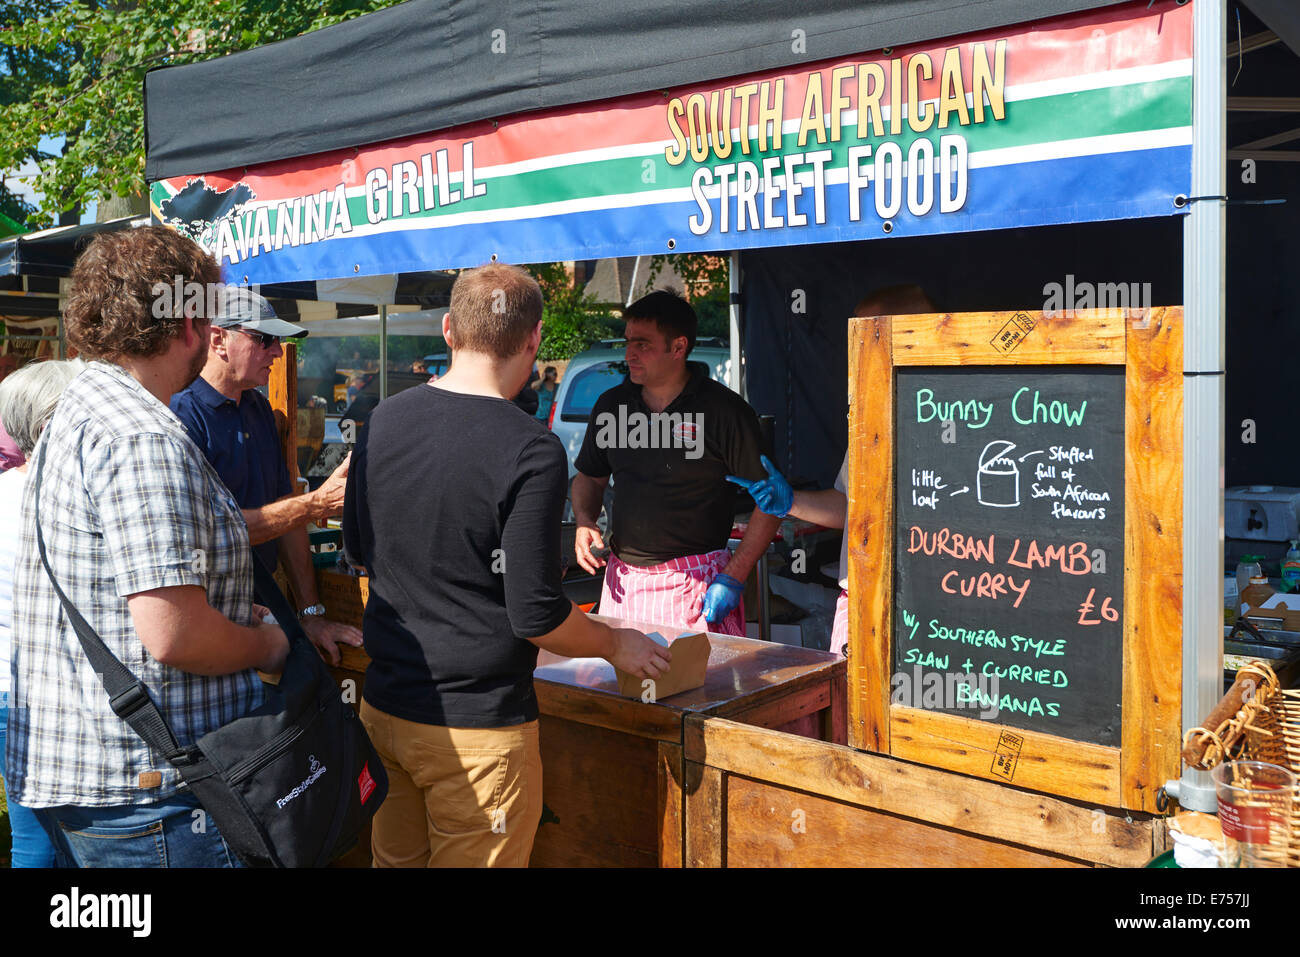 Stall Selling South African Street Food At The Food And Drink Festival Leamington Spa Warwickshire UK Stock Photo